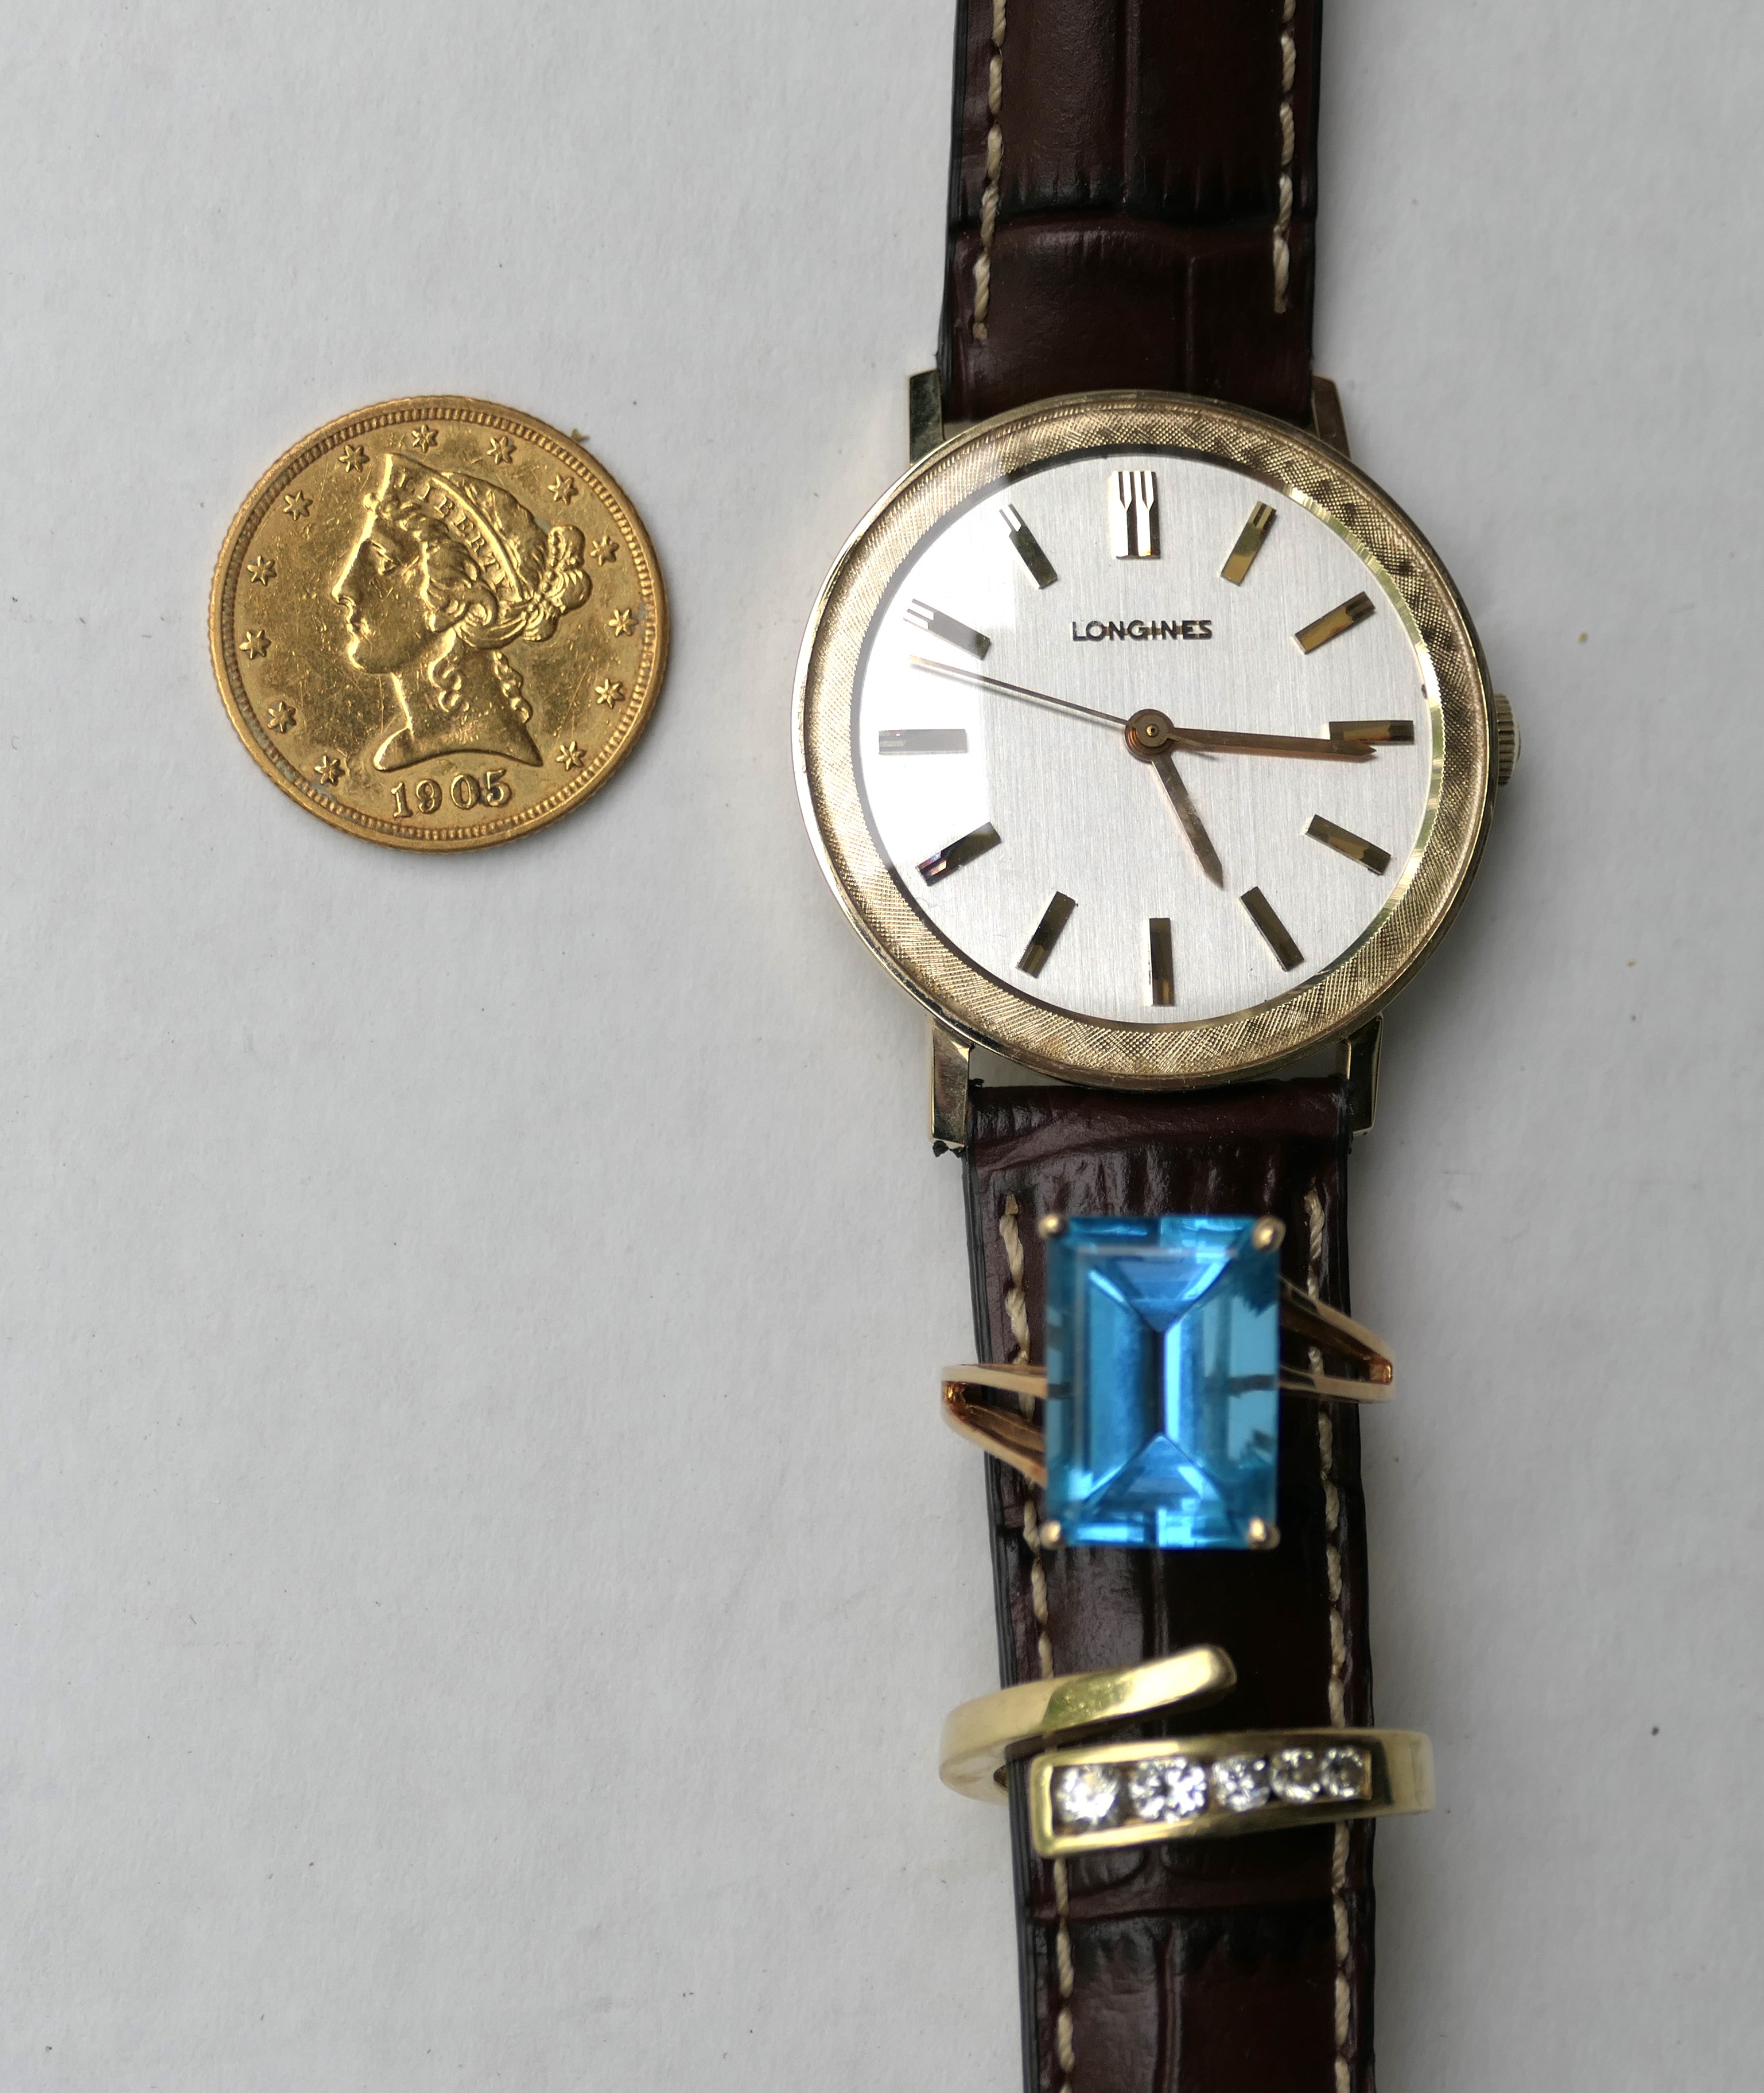 Sunday May 5th 1:00pm Special Jewelry, Coin, and Watch Auction - Online Only 